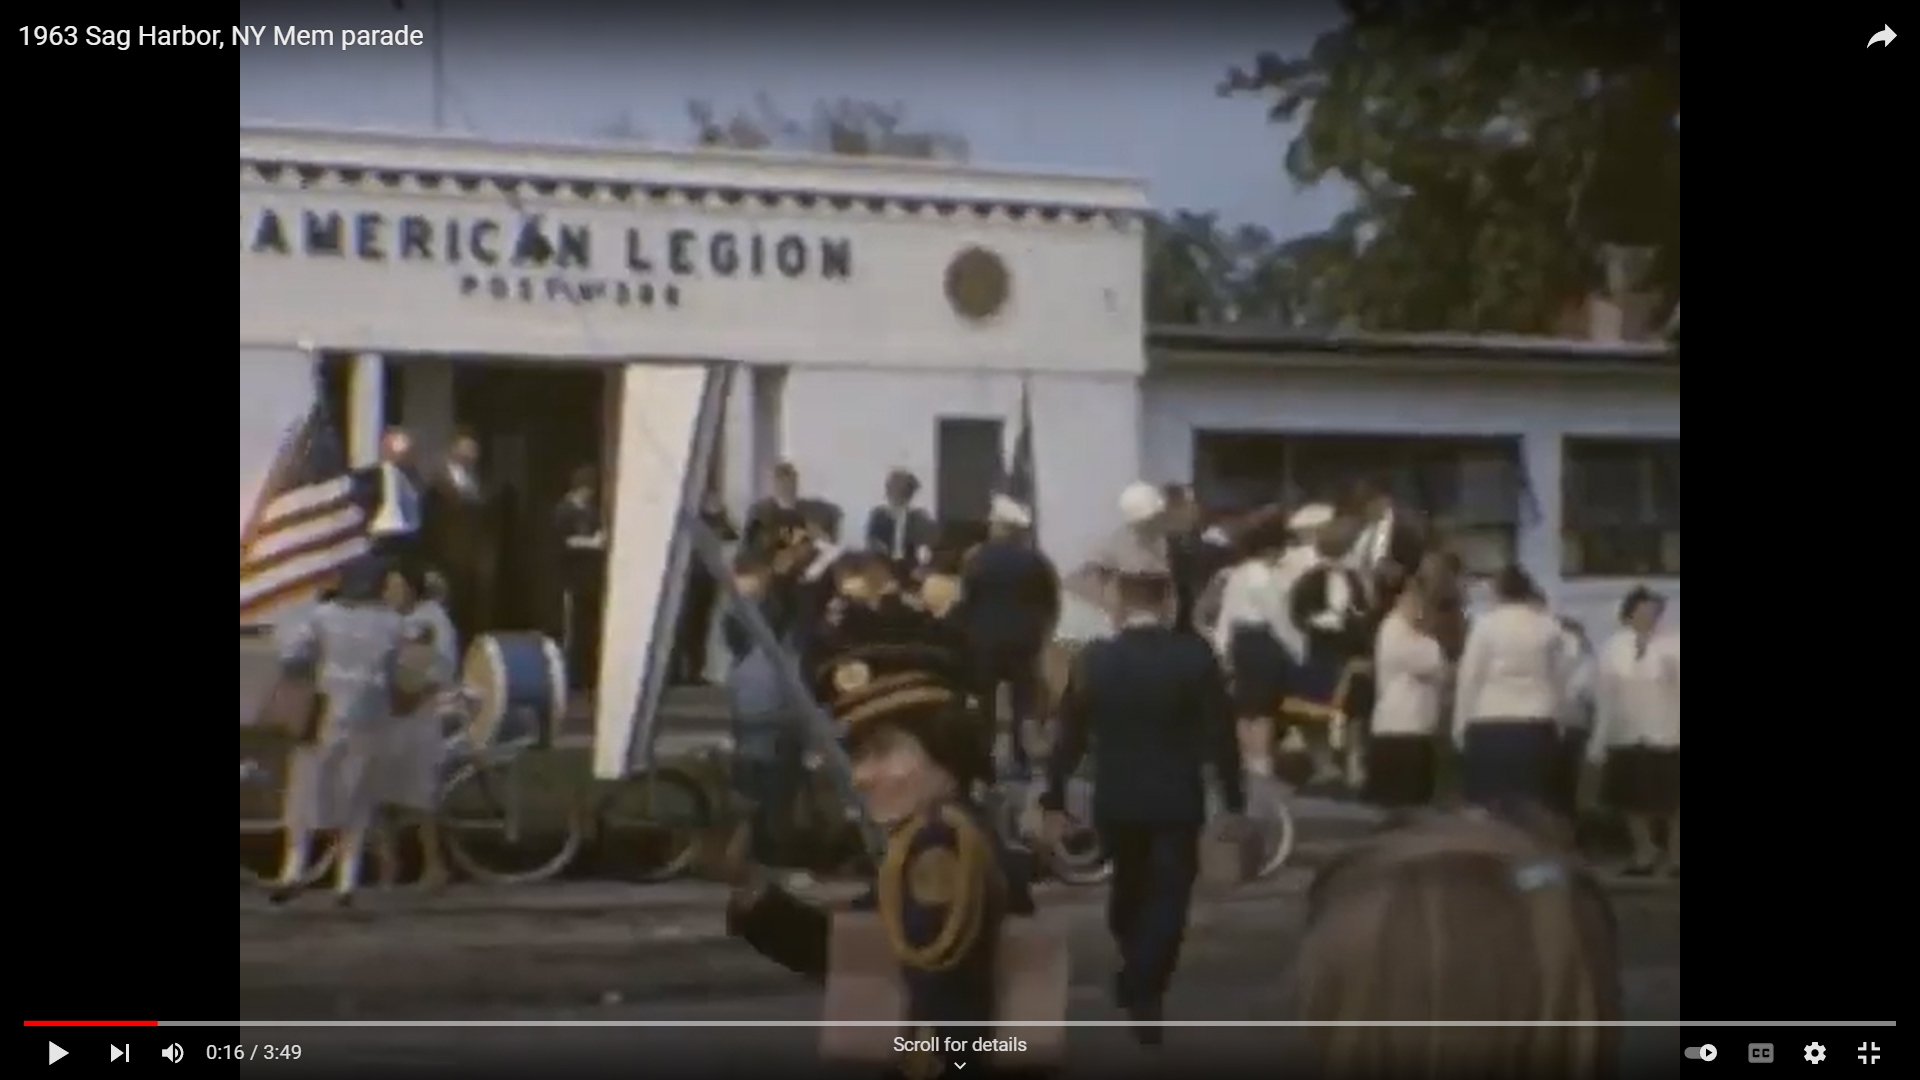 People gather at the American Legion before the 1963 Sag Harbor Memorial Day parade.